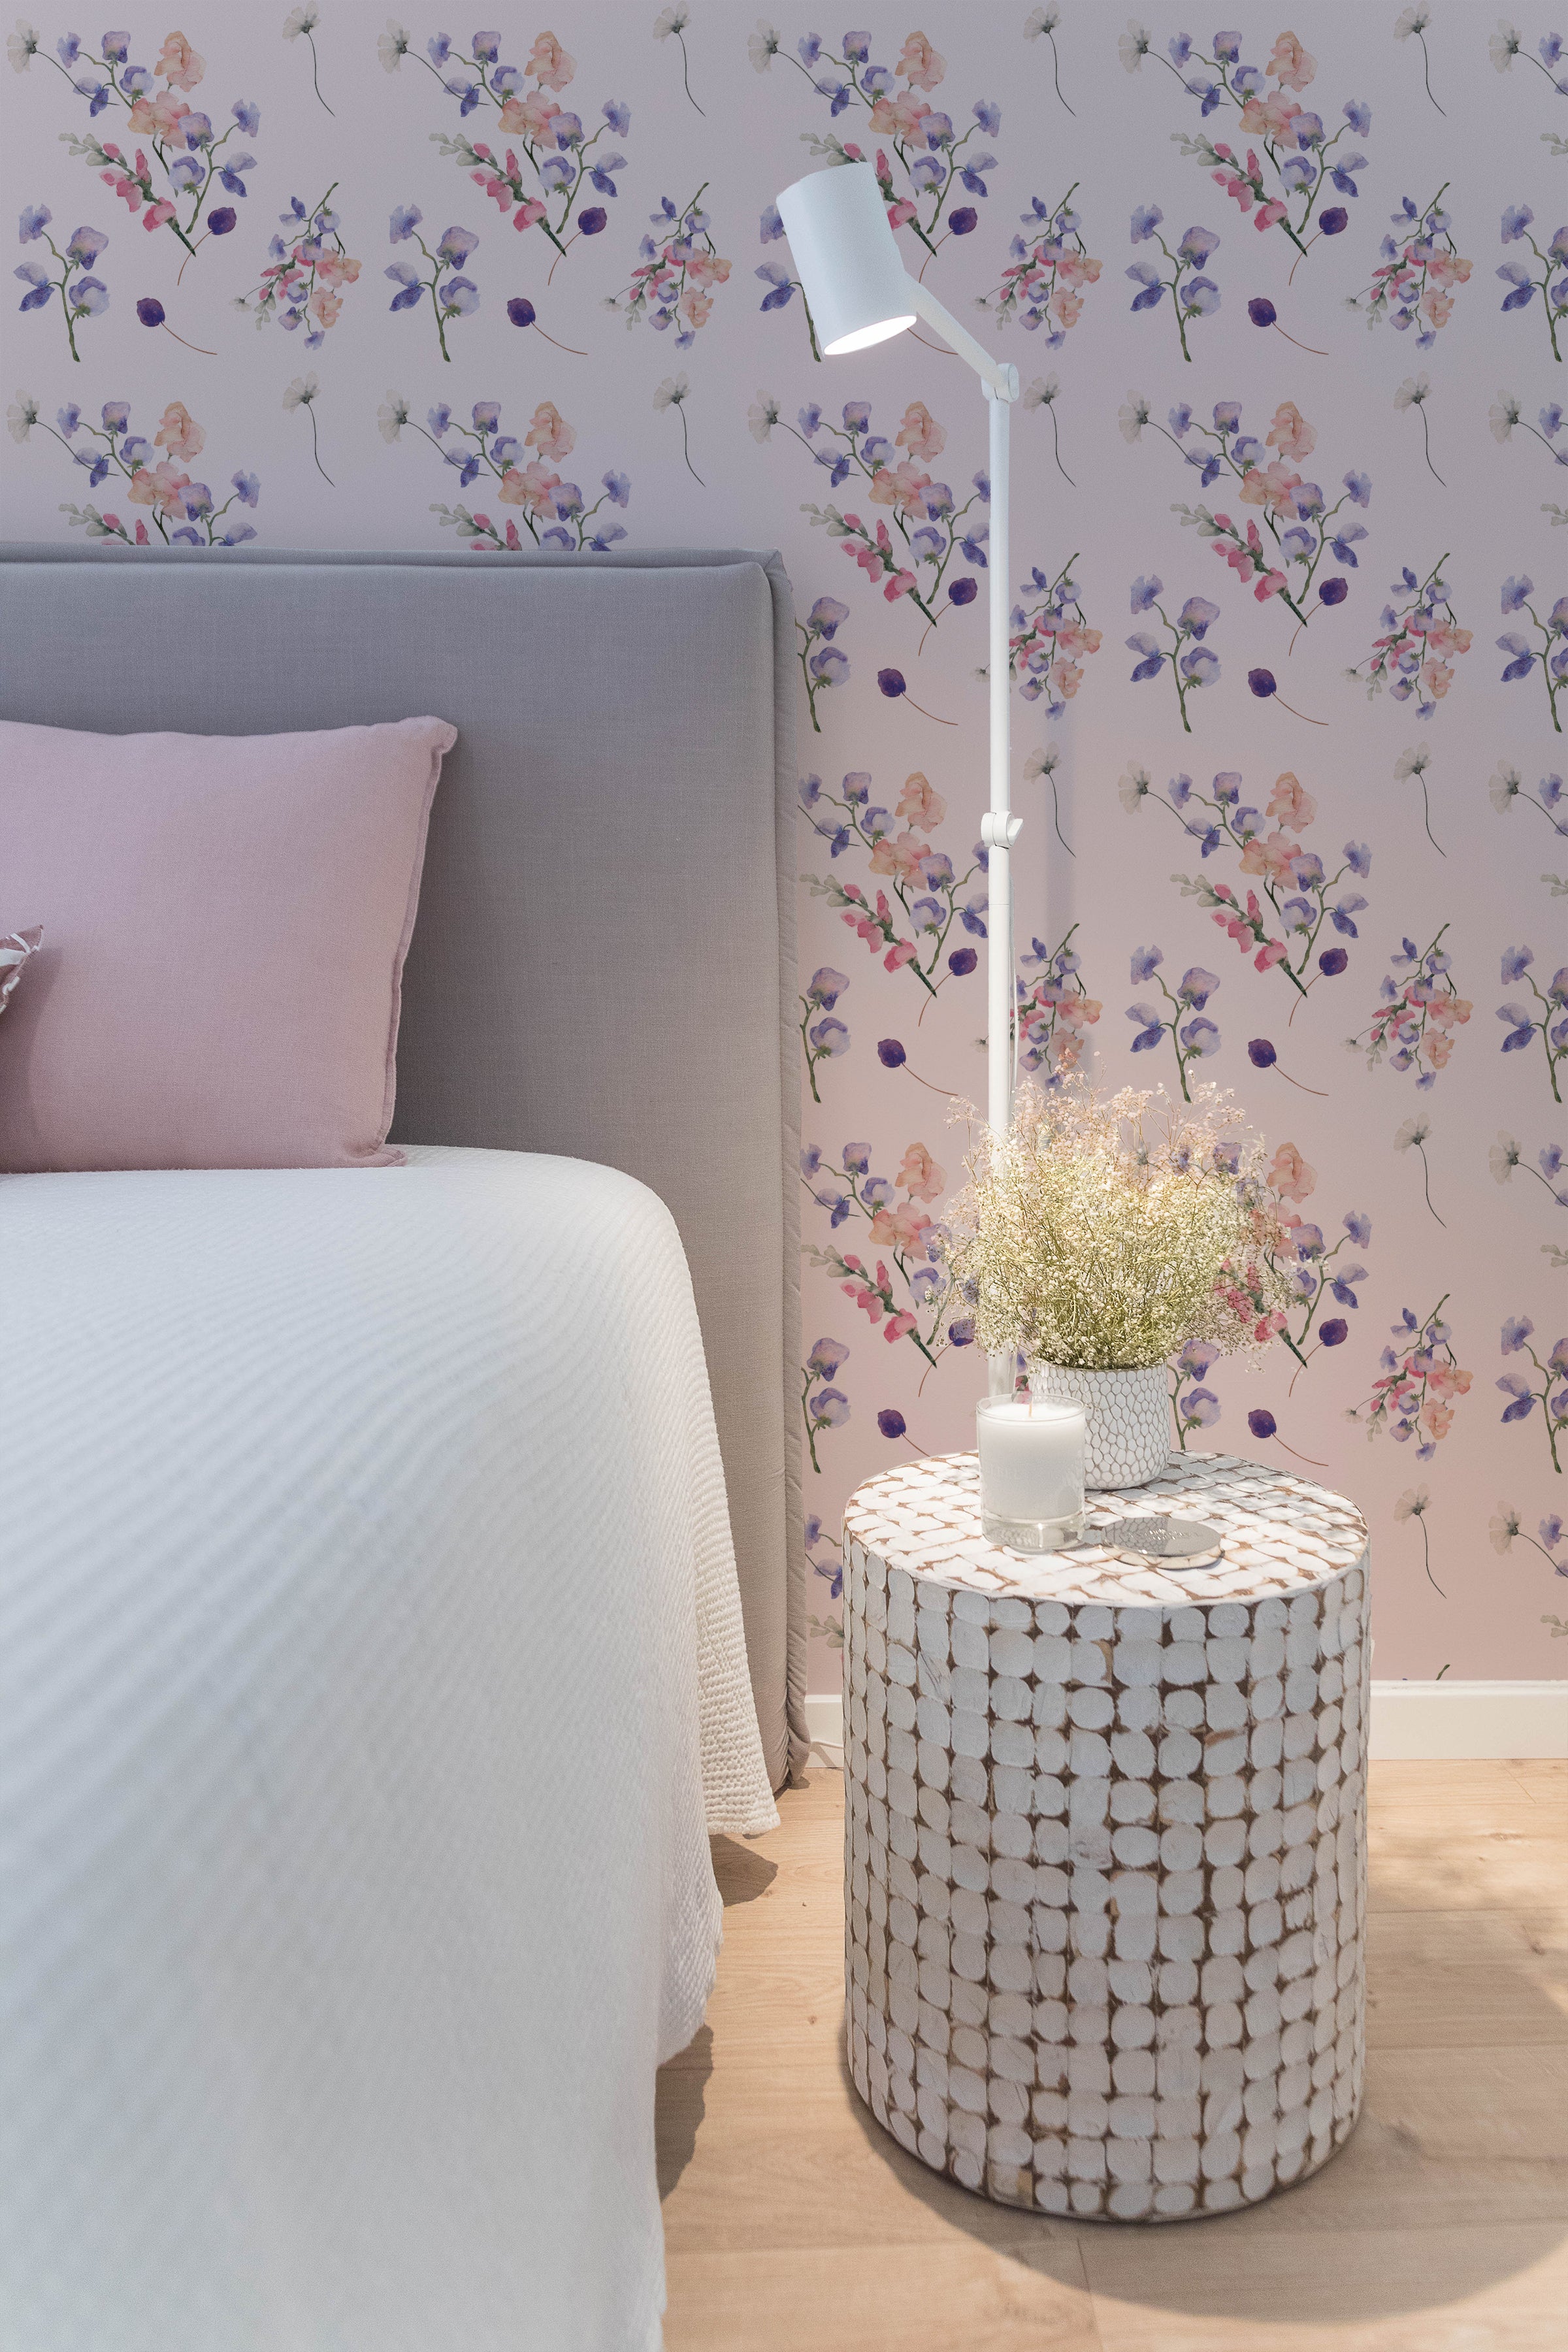 Violet Bloom Wallpaper featuring a soft floral pattern on a nude background in a bedroom setting, with a grey headboard, pink pillows, and a white bedside lamp and table.